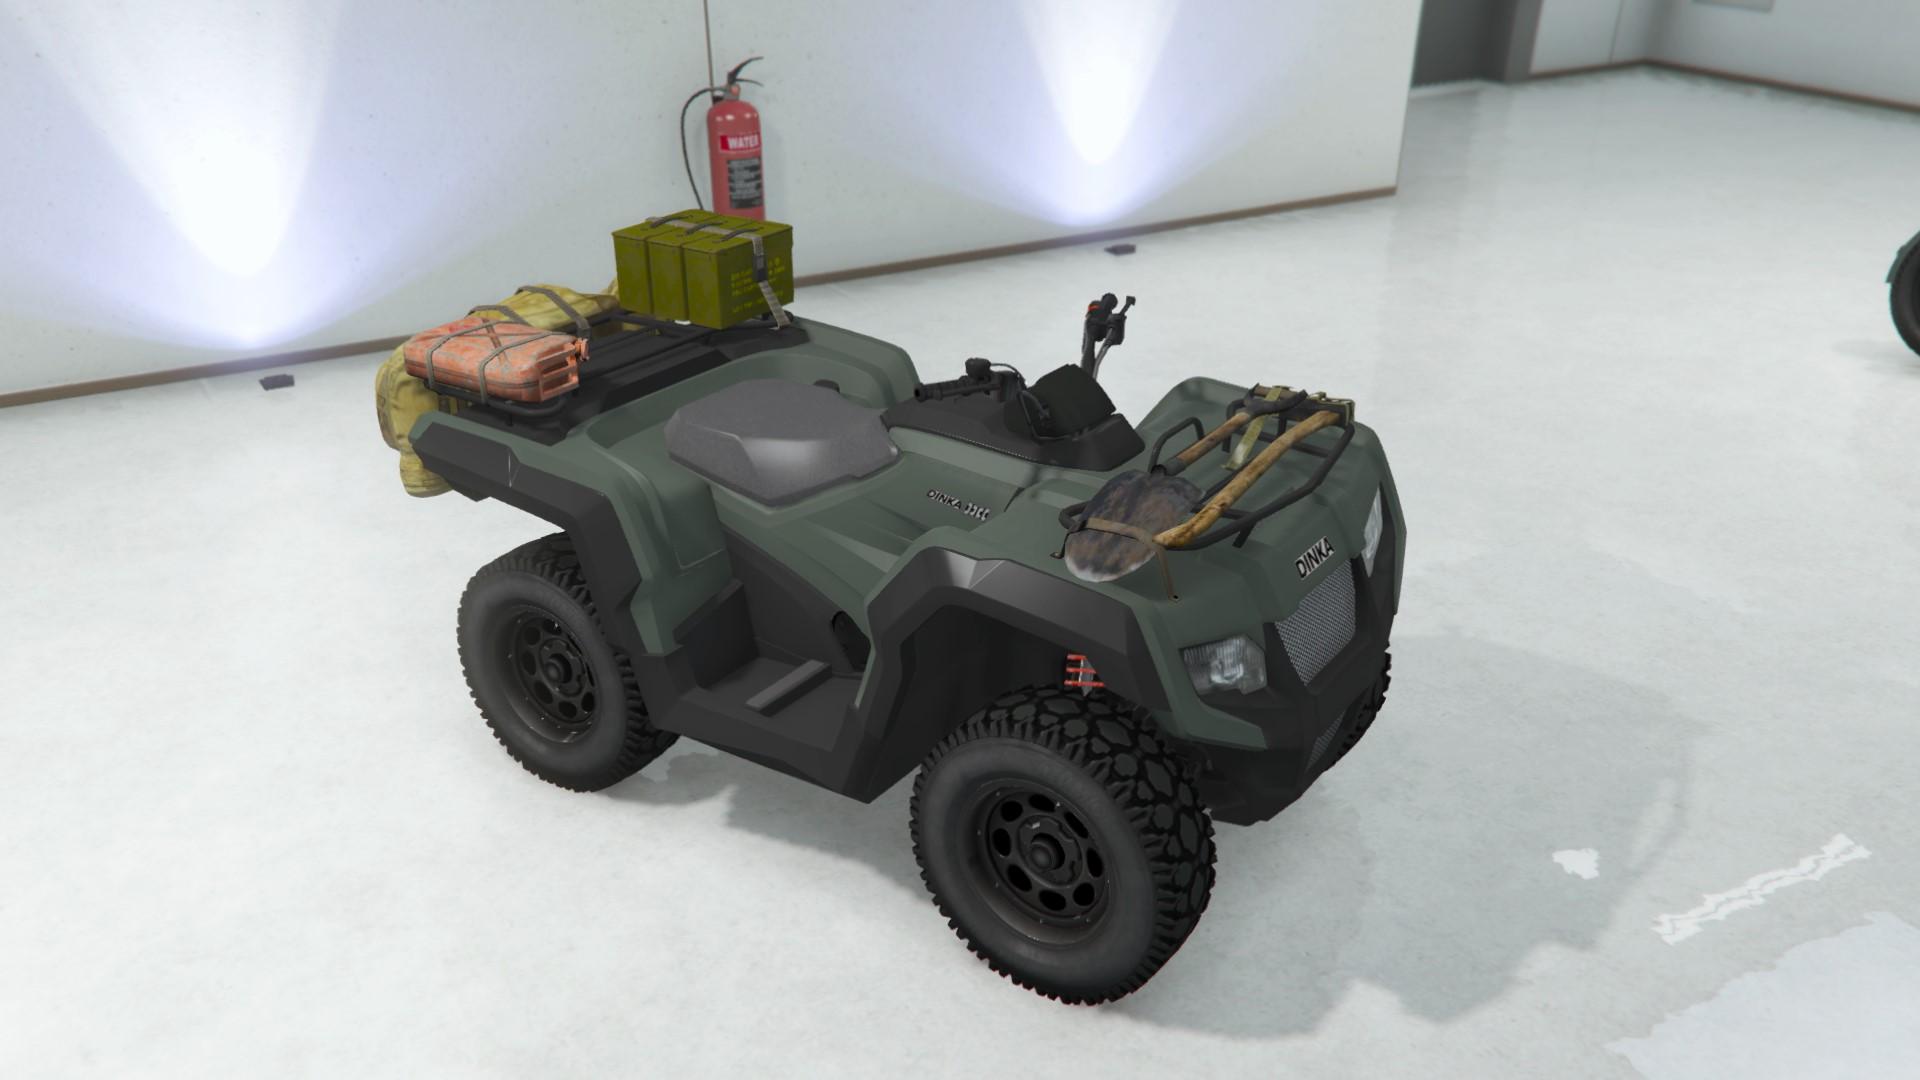 GTA Online players can grab the new Dinka Verus off-roader for free as an  in-game gift